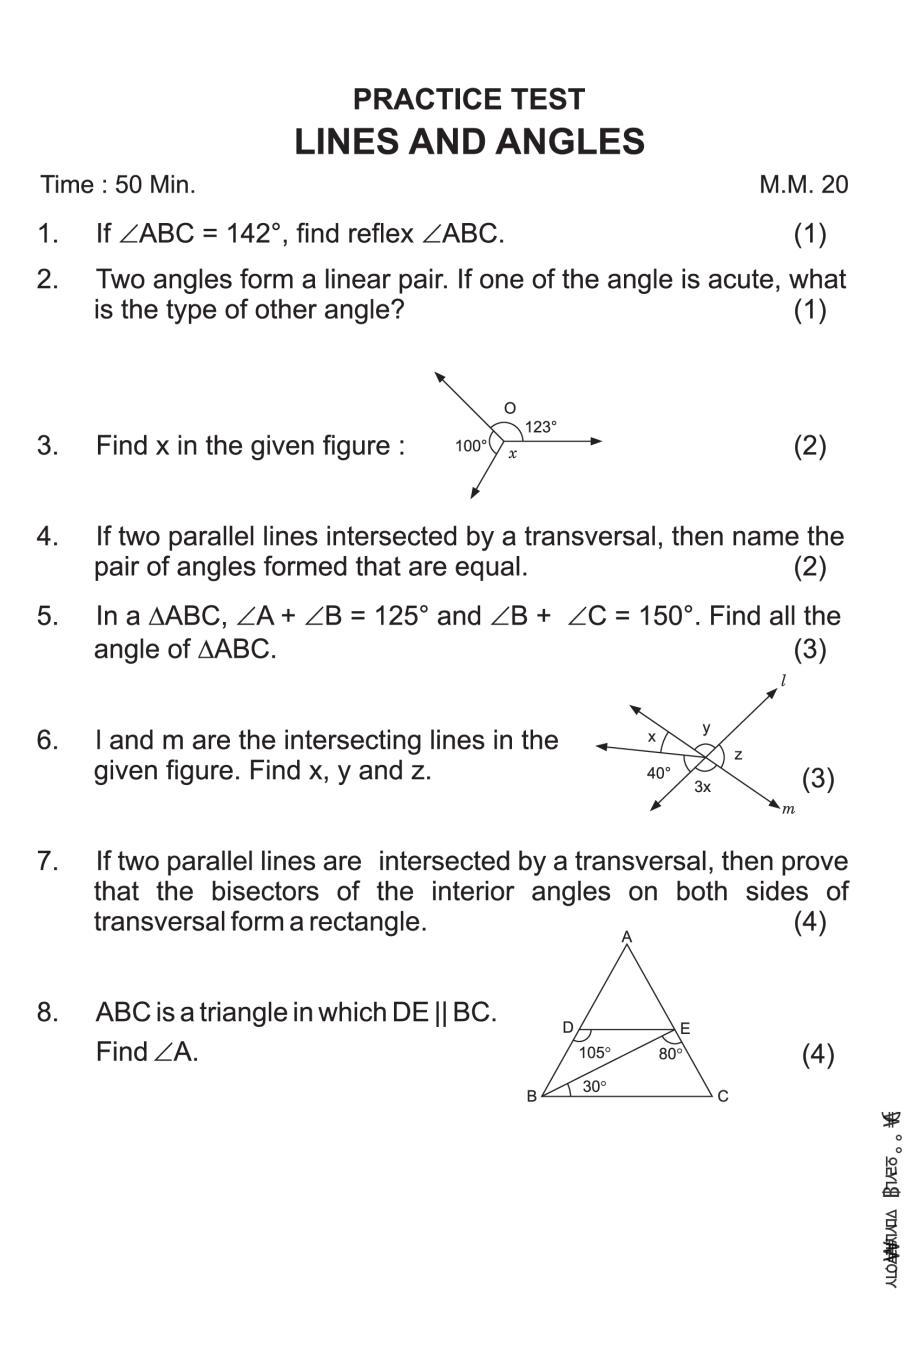 case study questions maths class 9 lines and angles